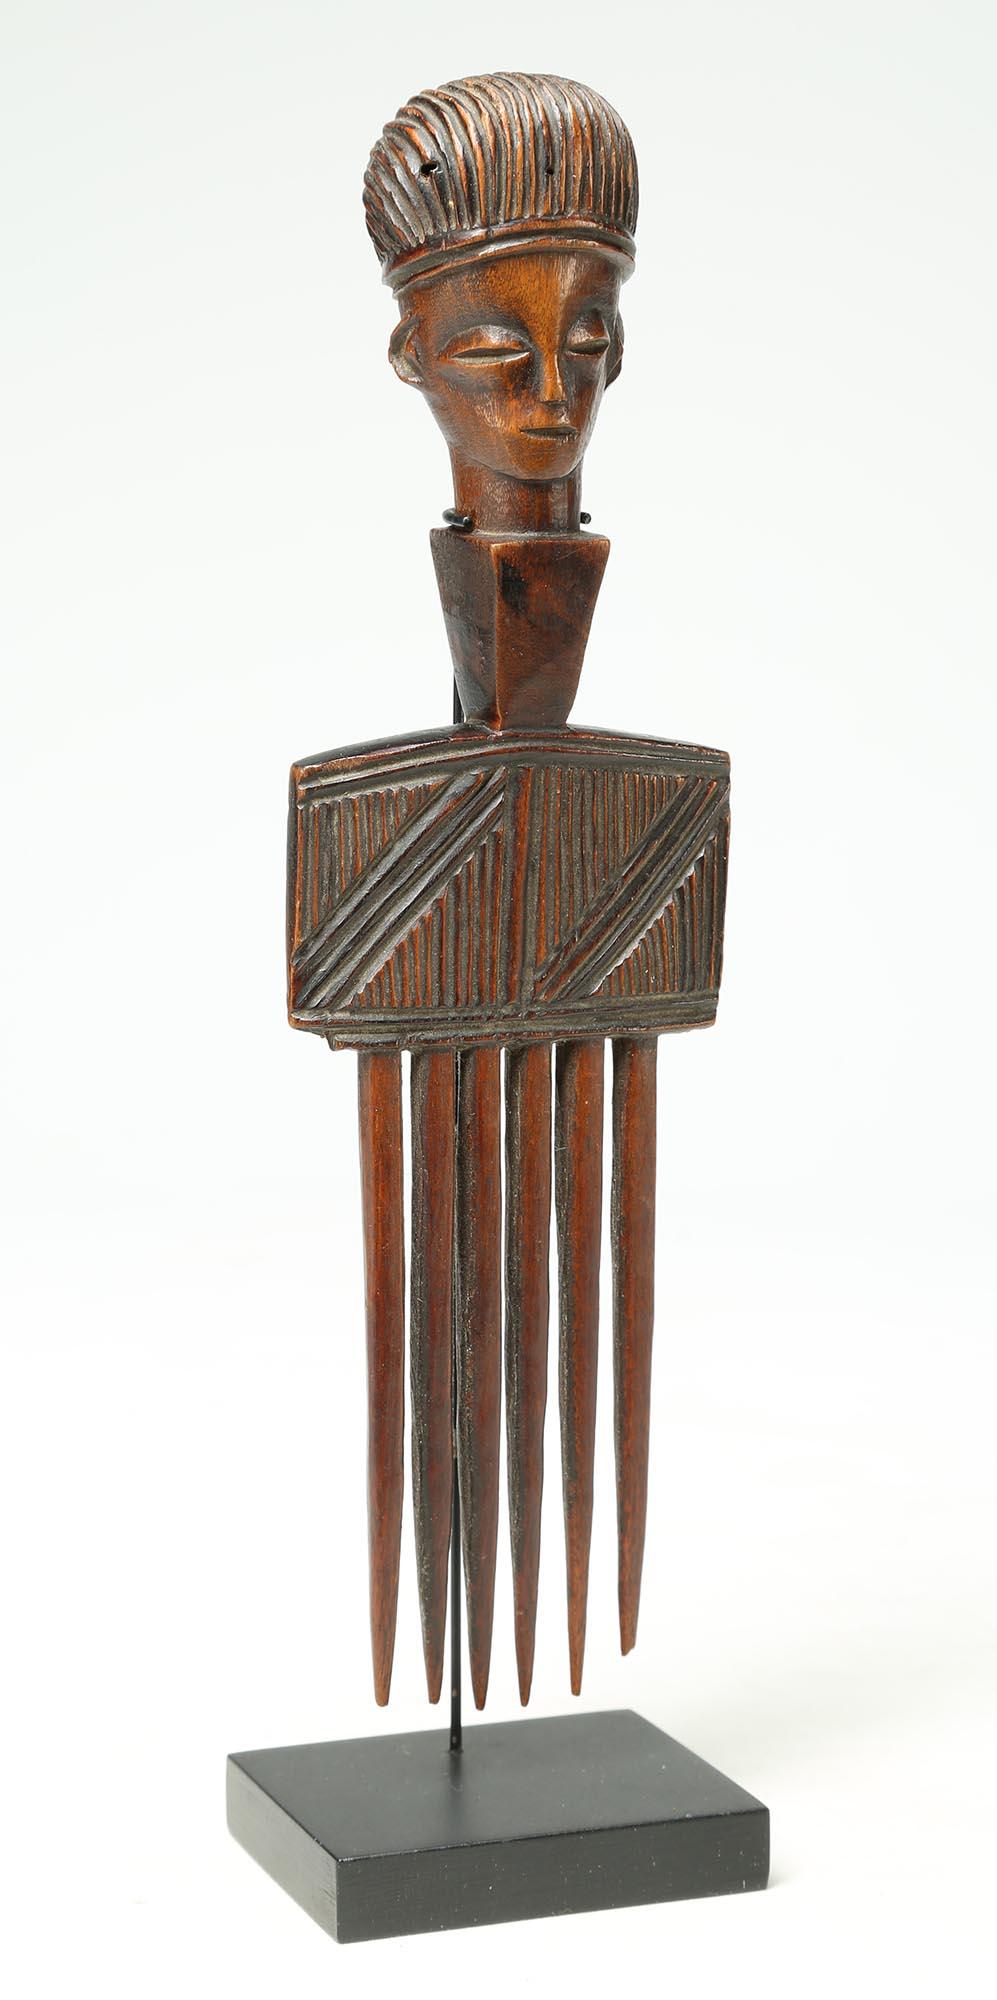 Congolese Finely Carved Wood Luena Comb, Great Hair Early 20th Century African Tribal Art For Sale